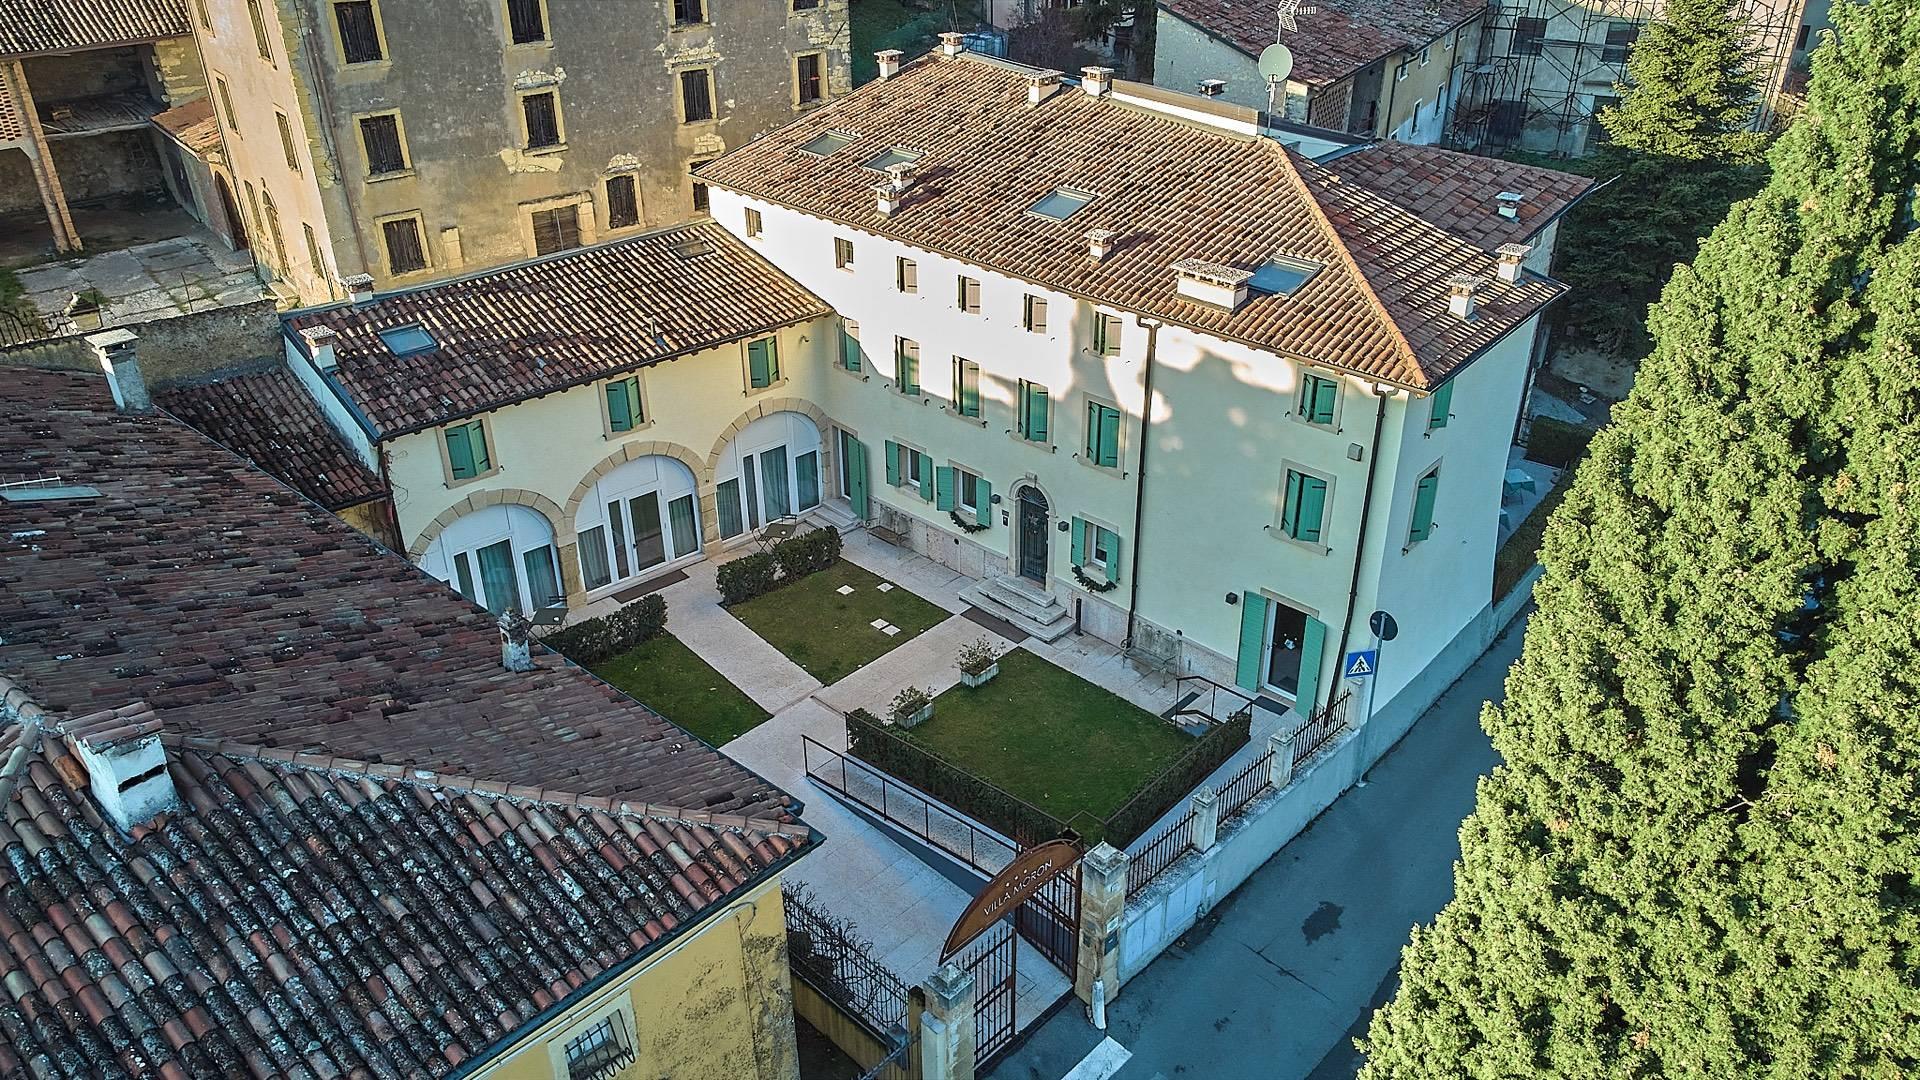 Villa used as charming hotel on the Valpolicella hills - 4